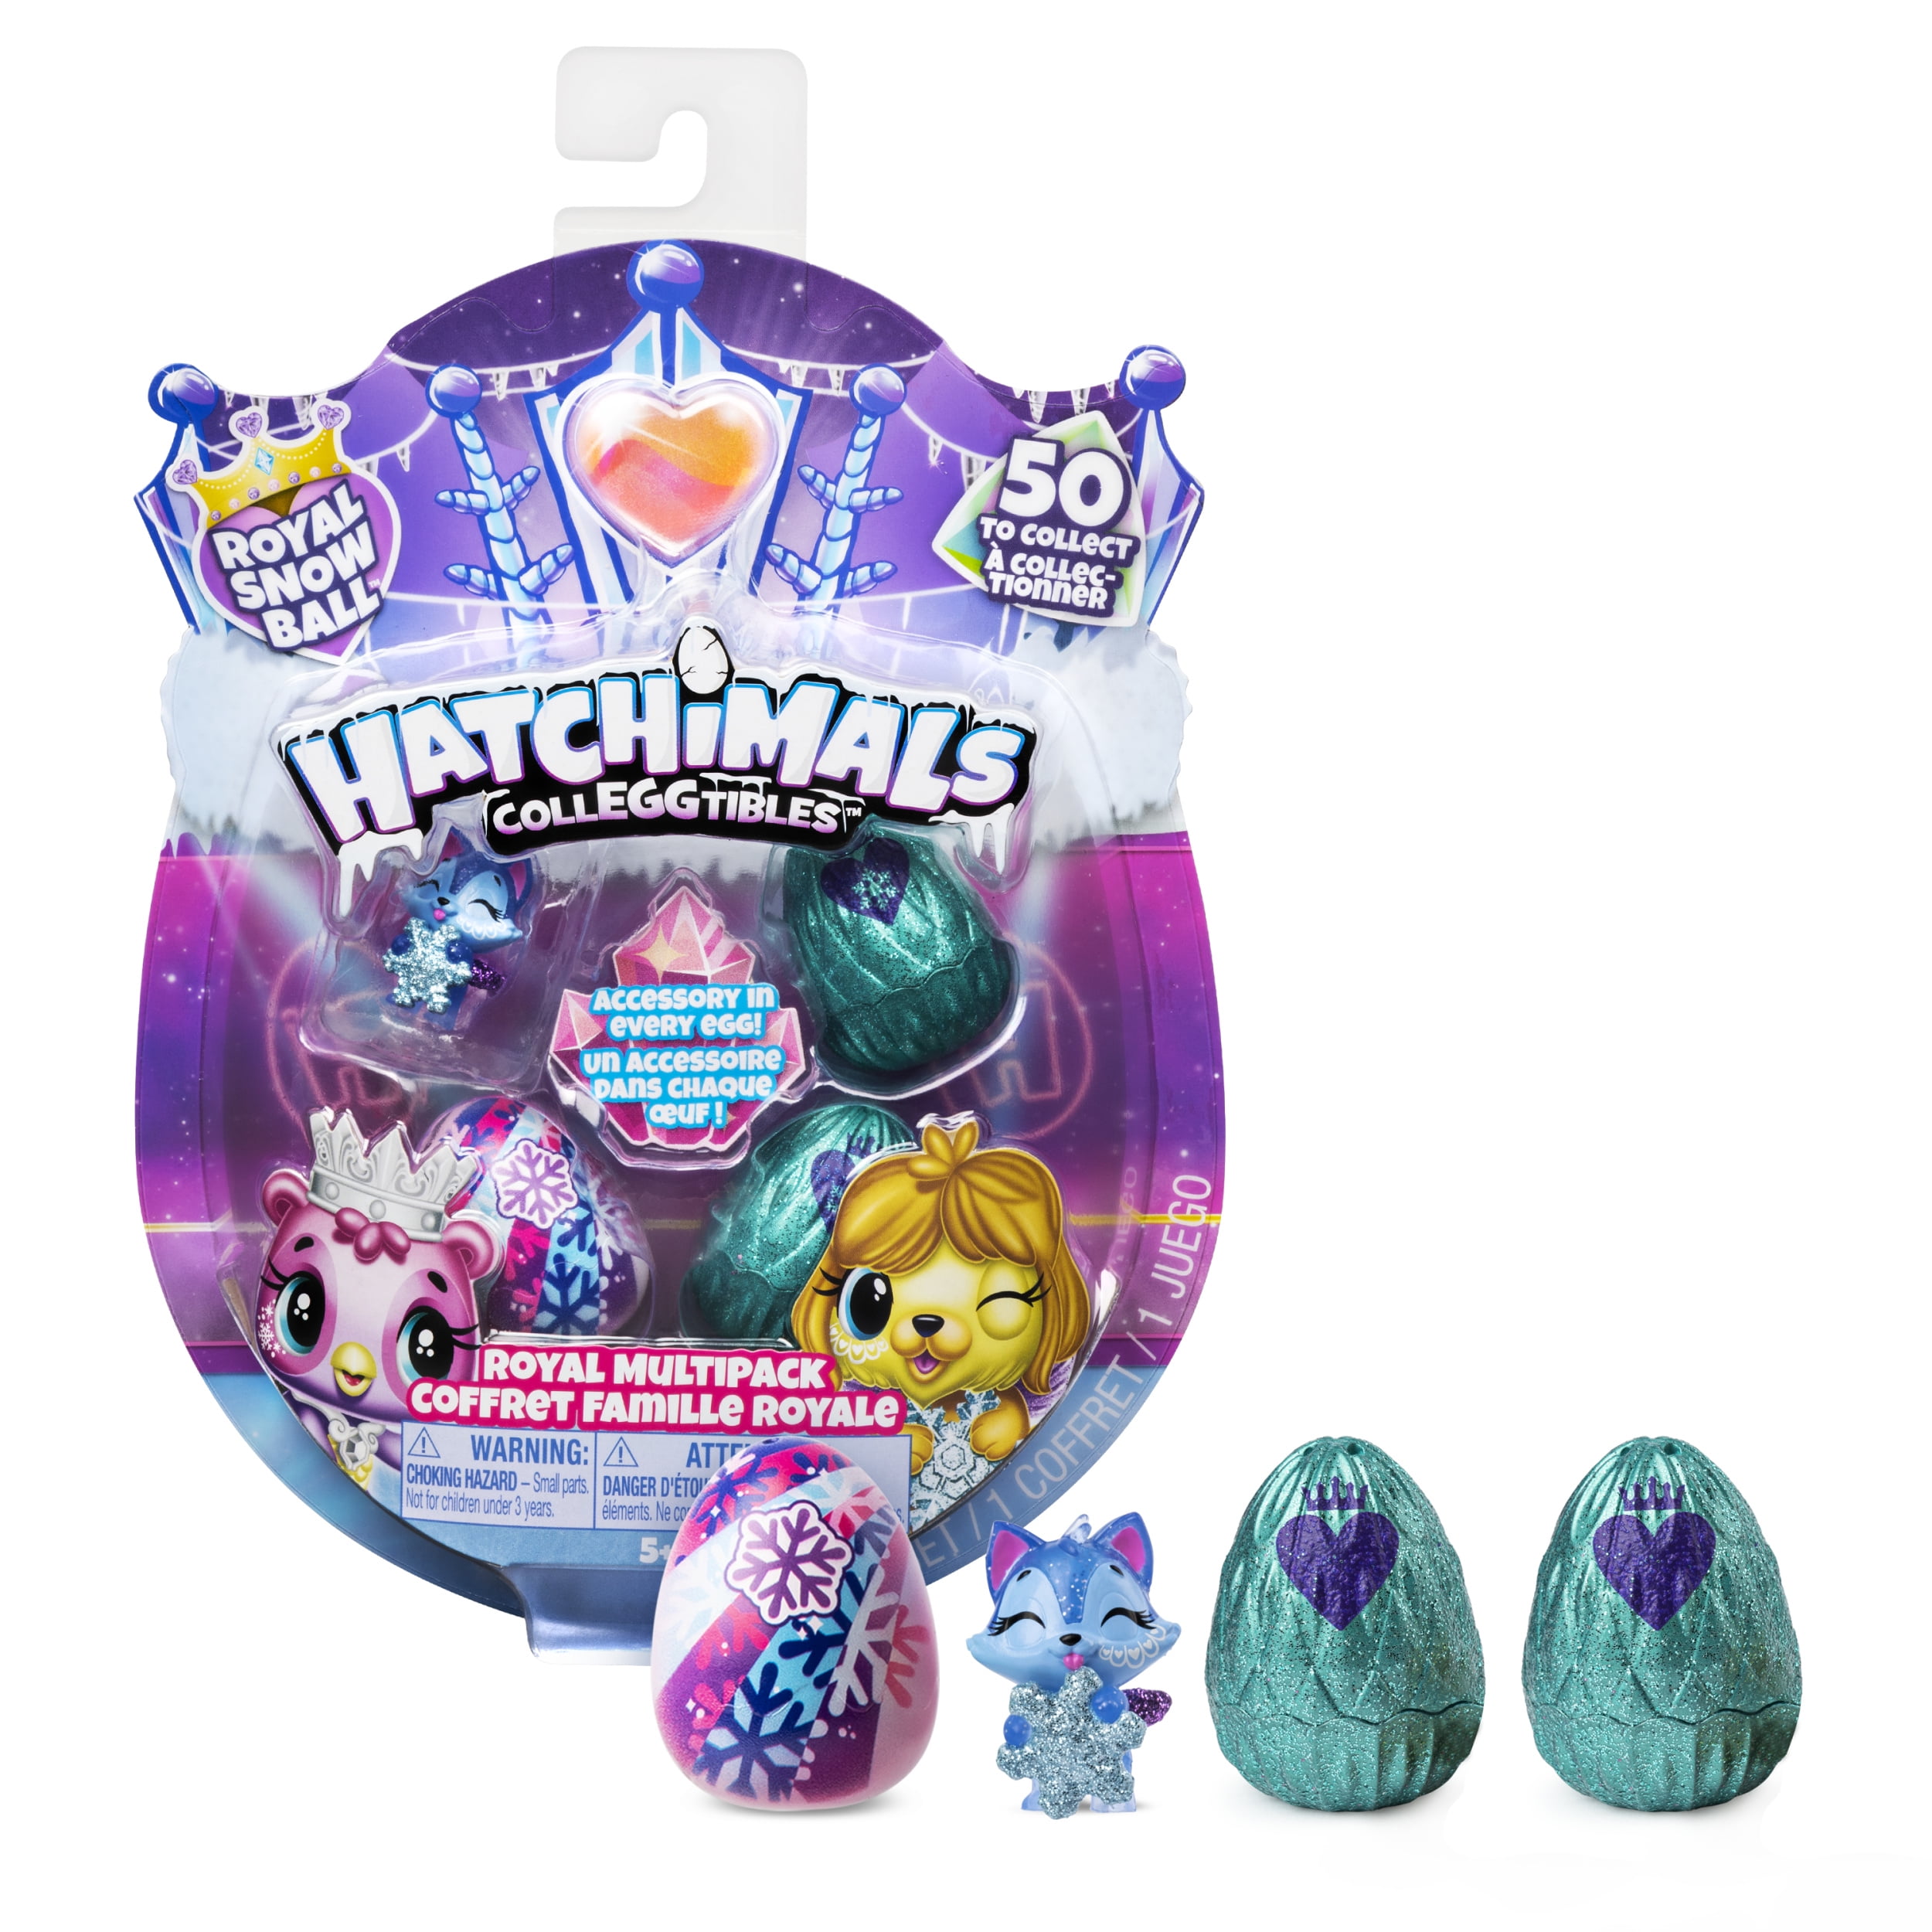 Hatchimals Collectibles Royal Snow Ball Gold Egg Blind Surprise Lot of 3 NEW 